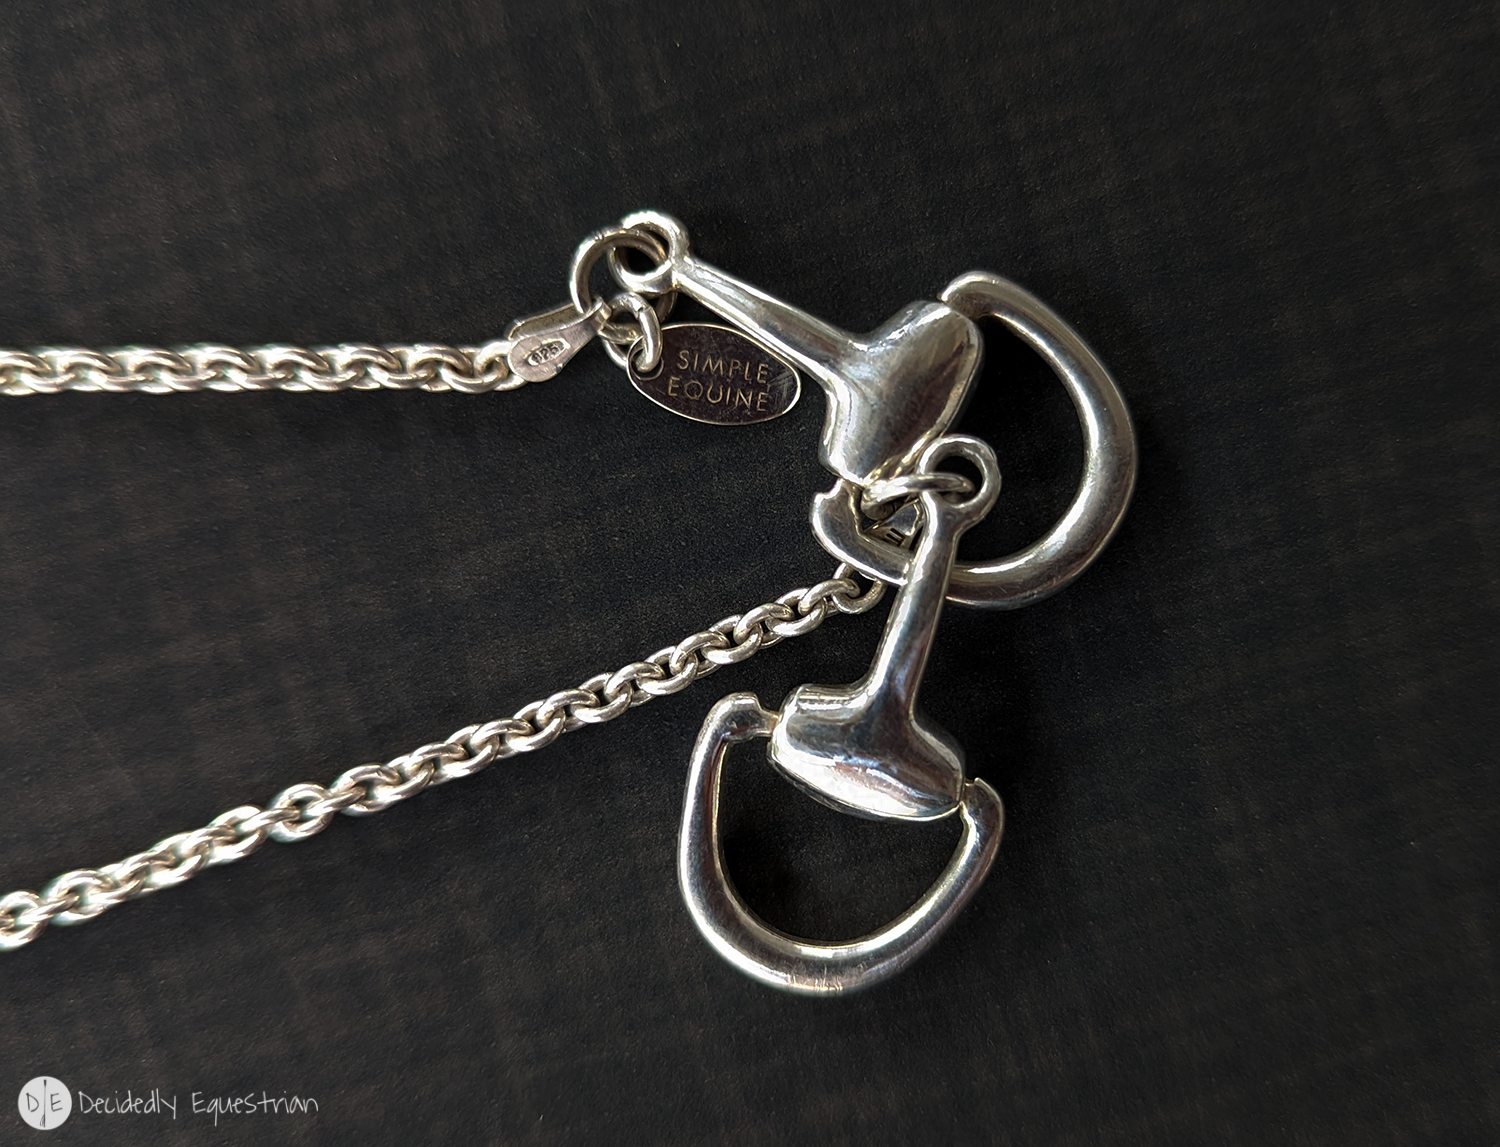 The Simple Equine Double Bit Lariat Review